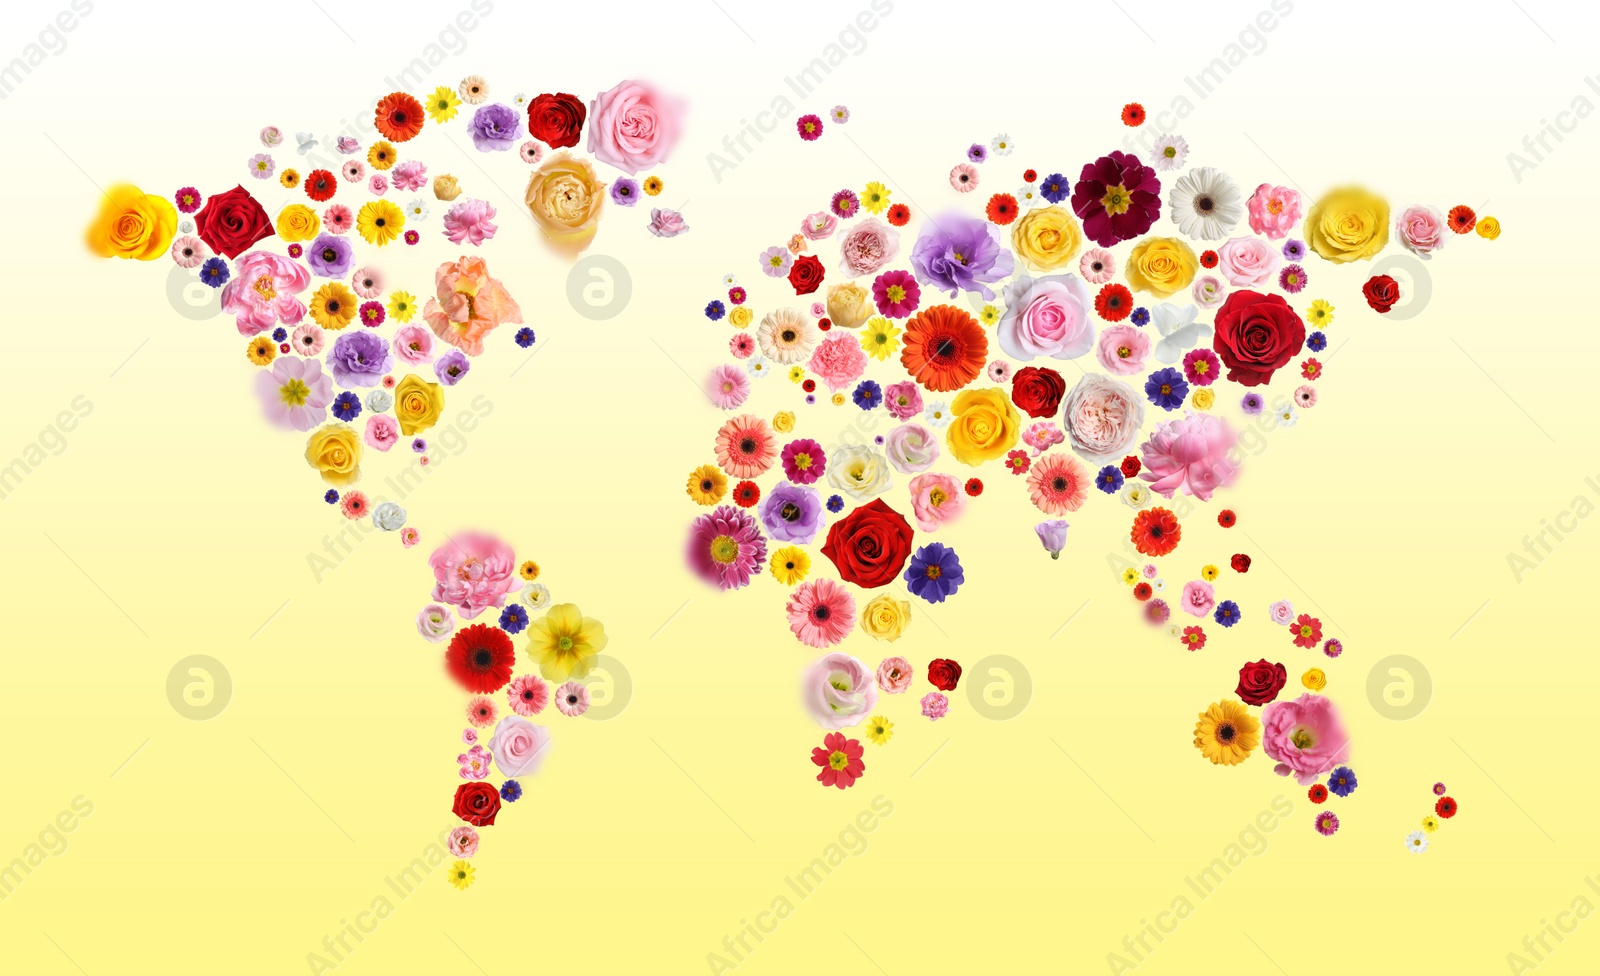 Image of World map made of beautiful flowers on gradient background, banner design